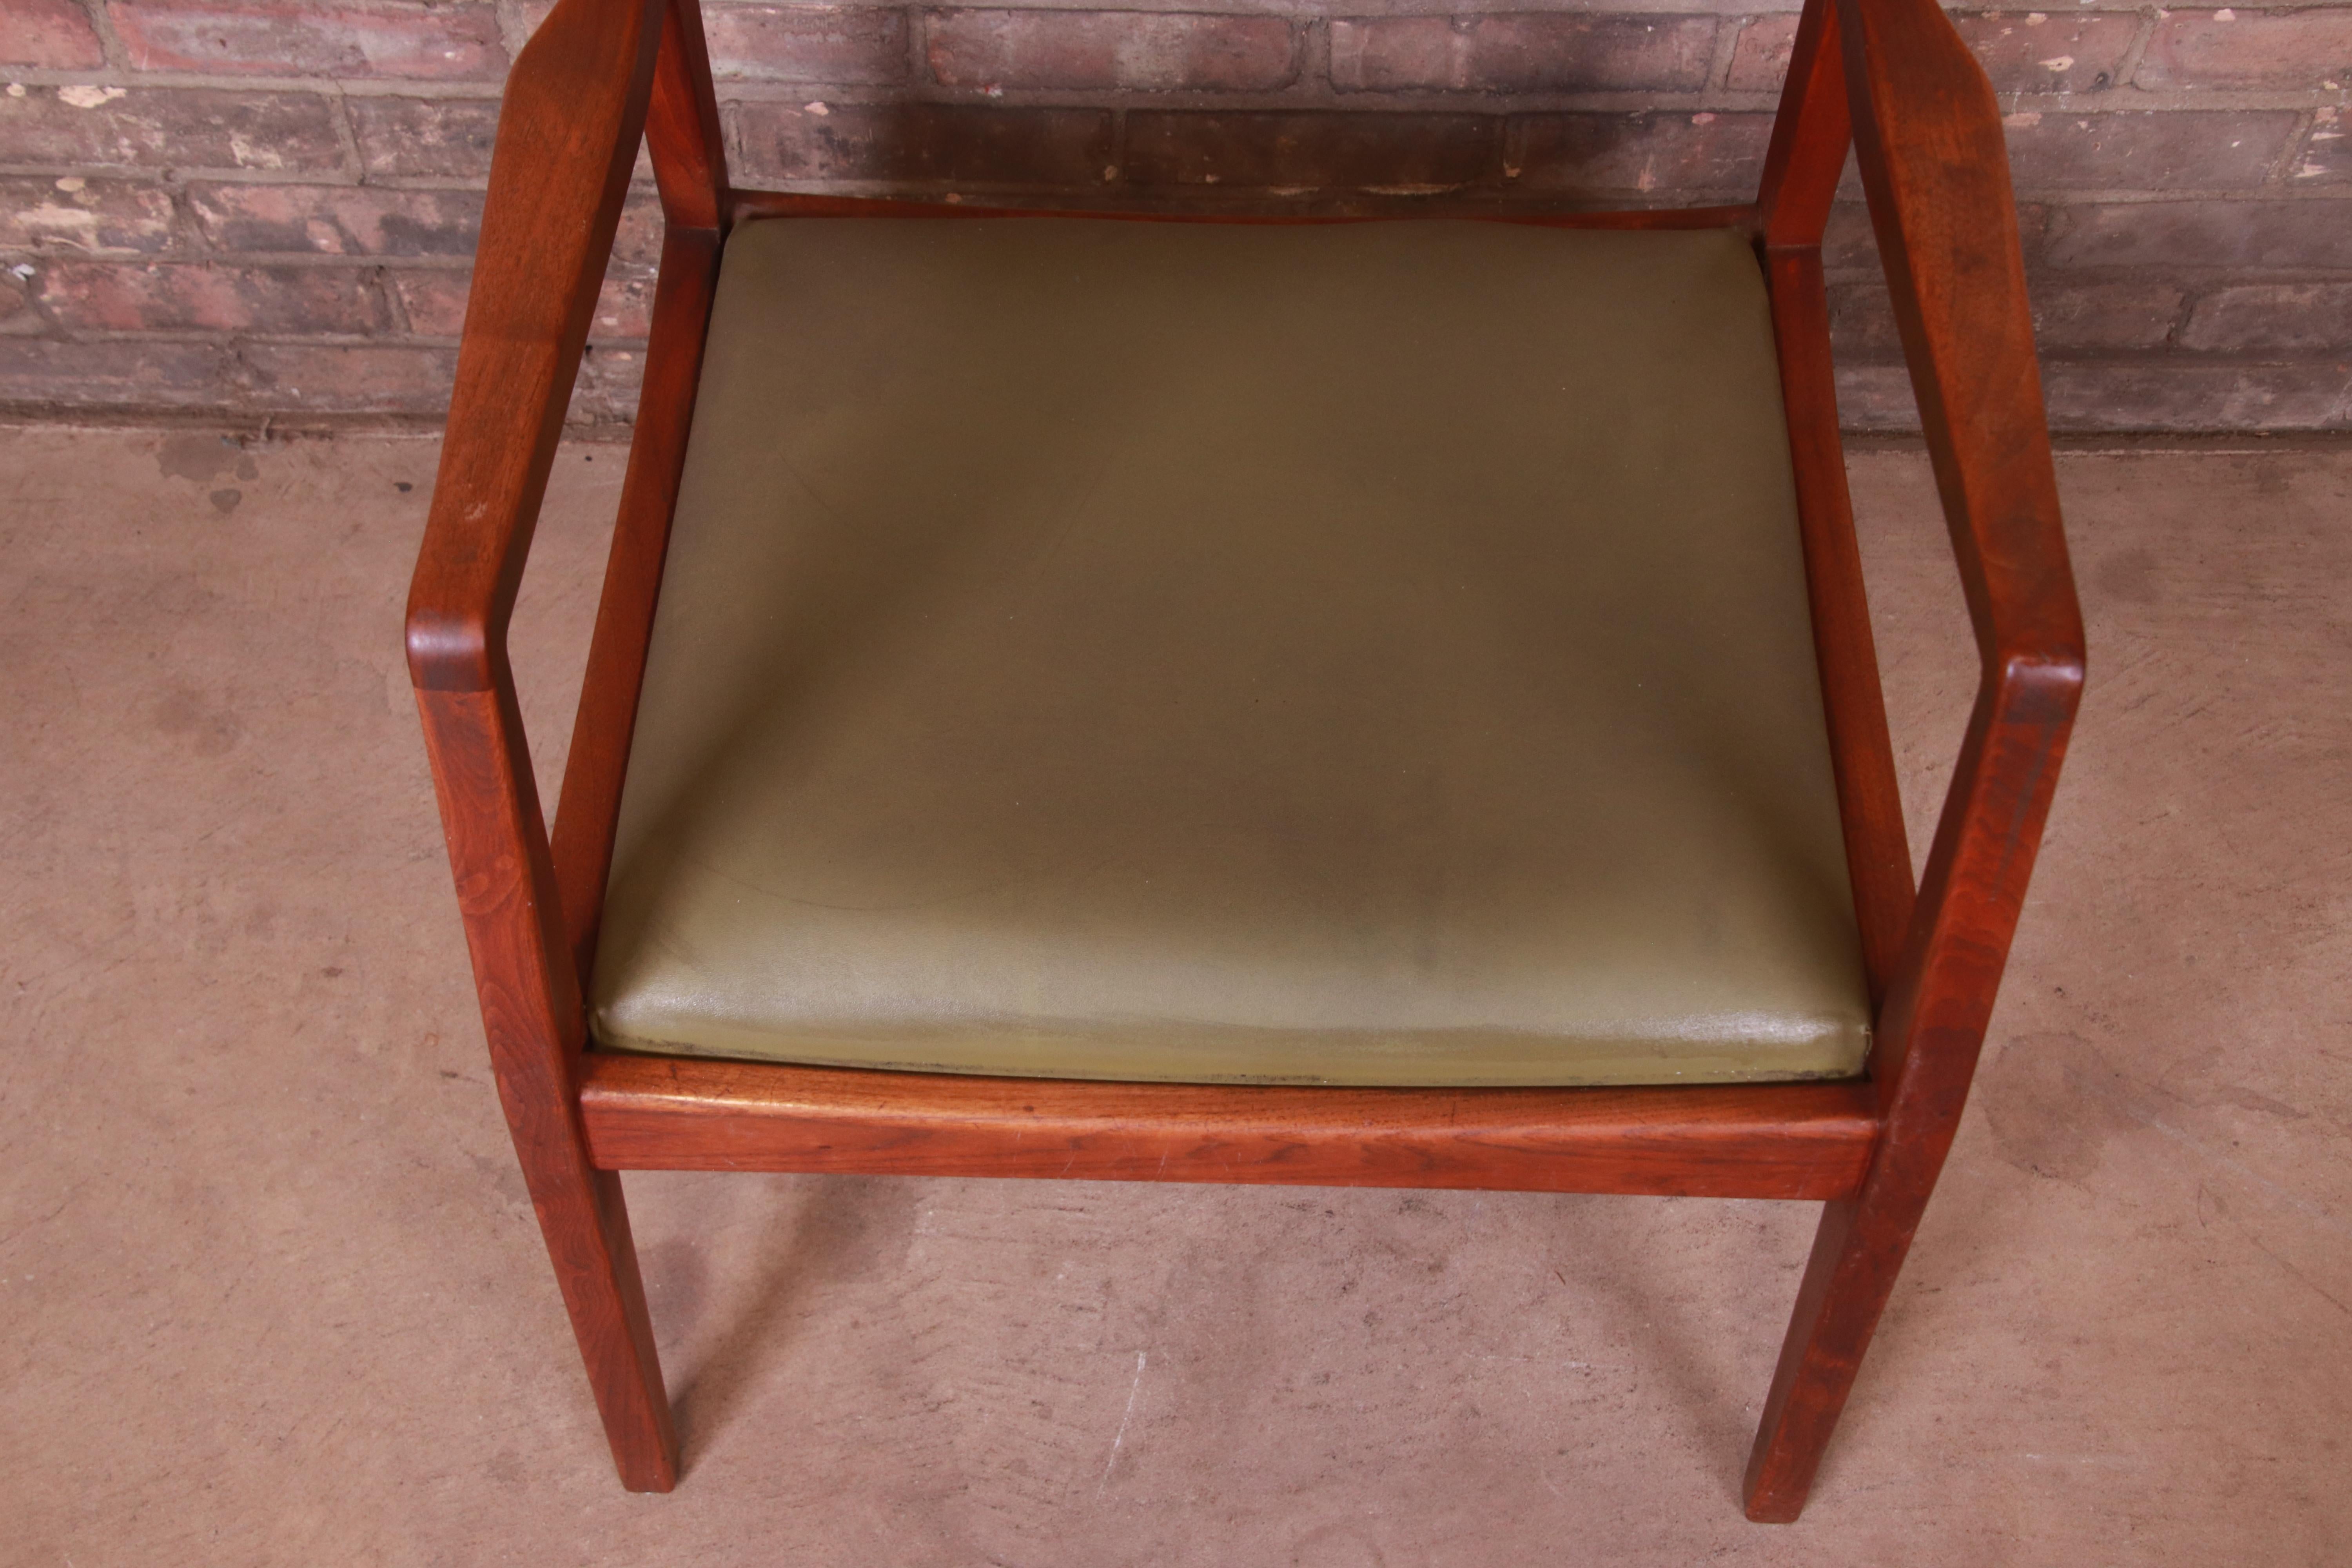 Upholstery Jens Risom Mid-Century Modern Sculpted Walnut Playboy Lounge Chair, 1960s For Sale